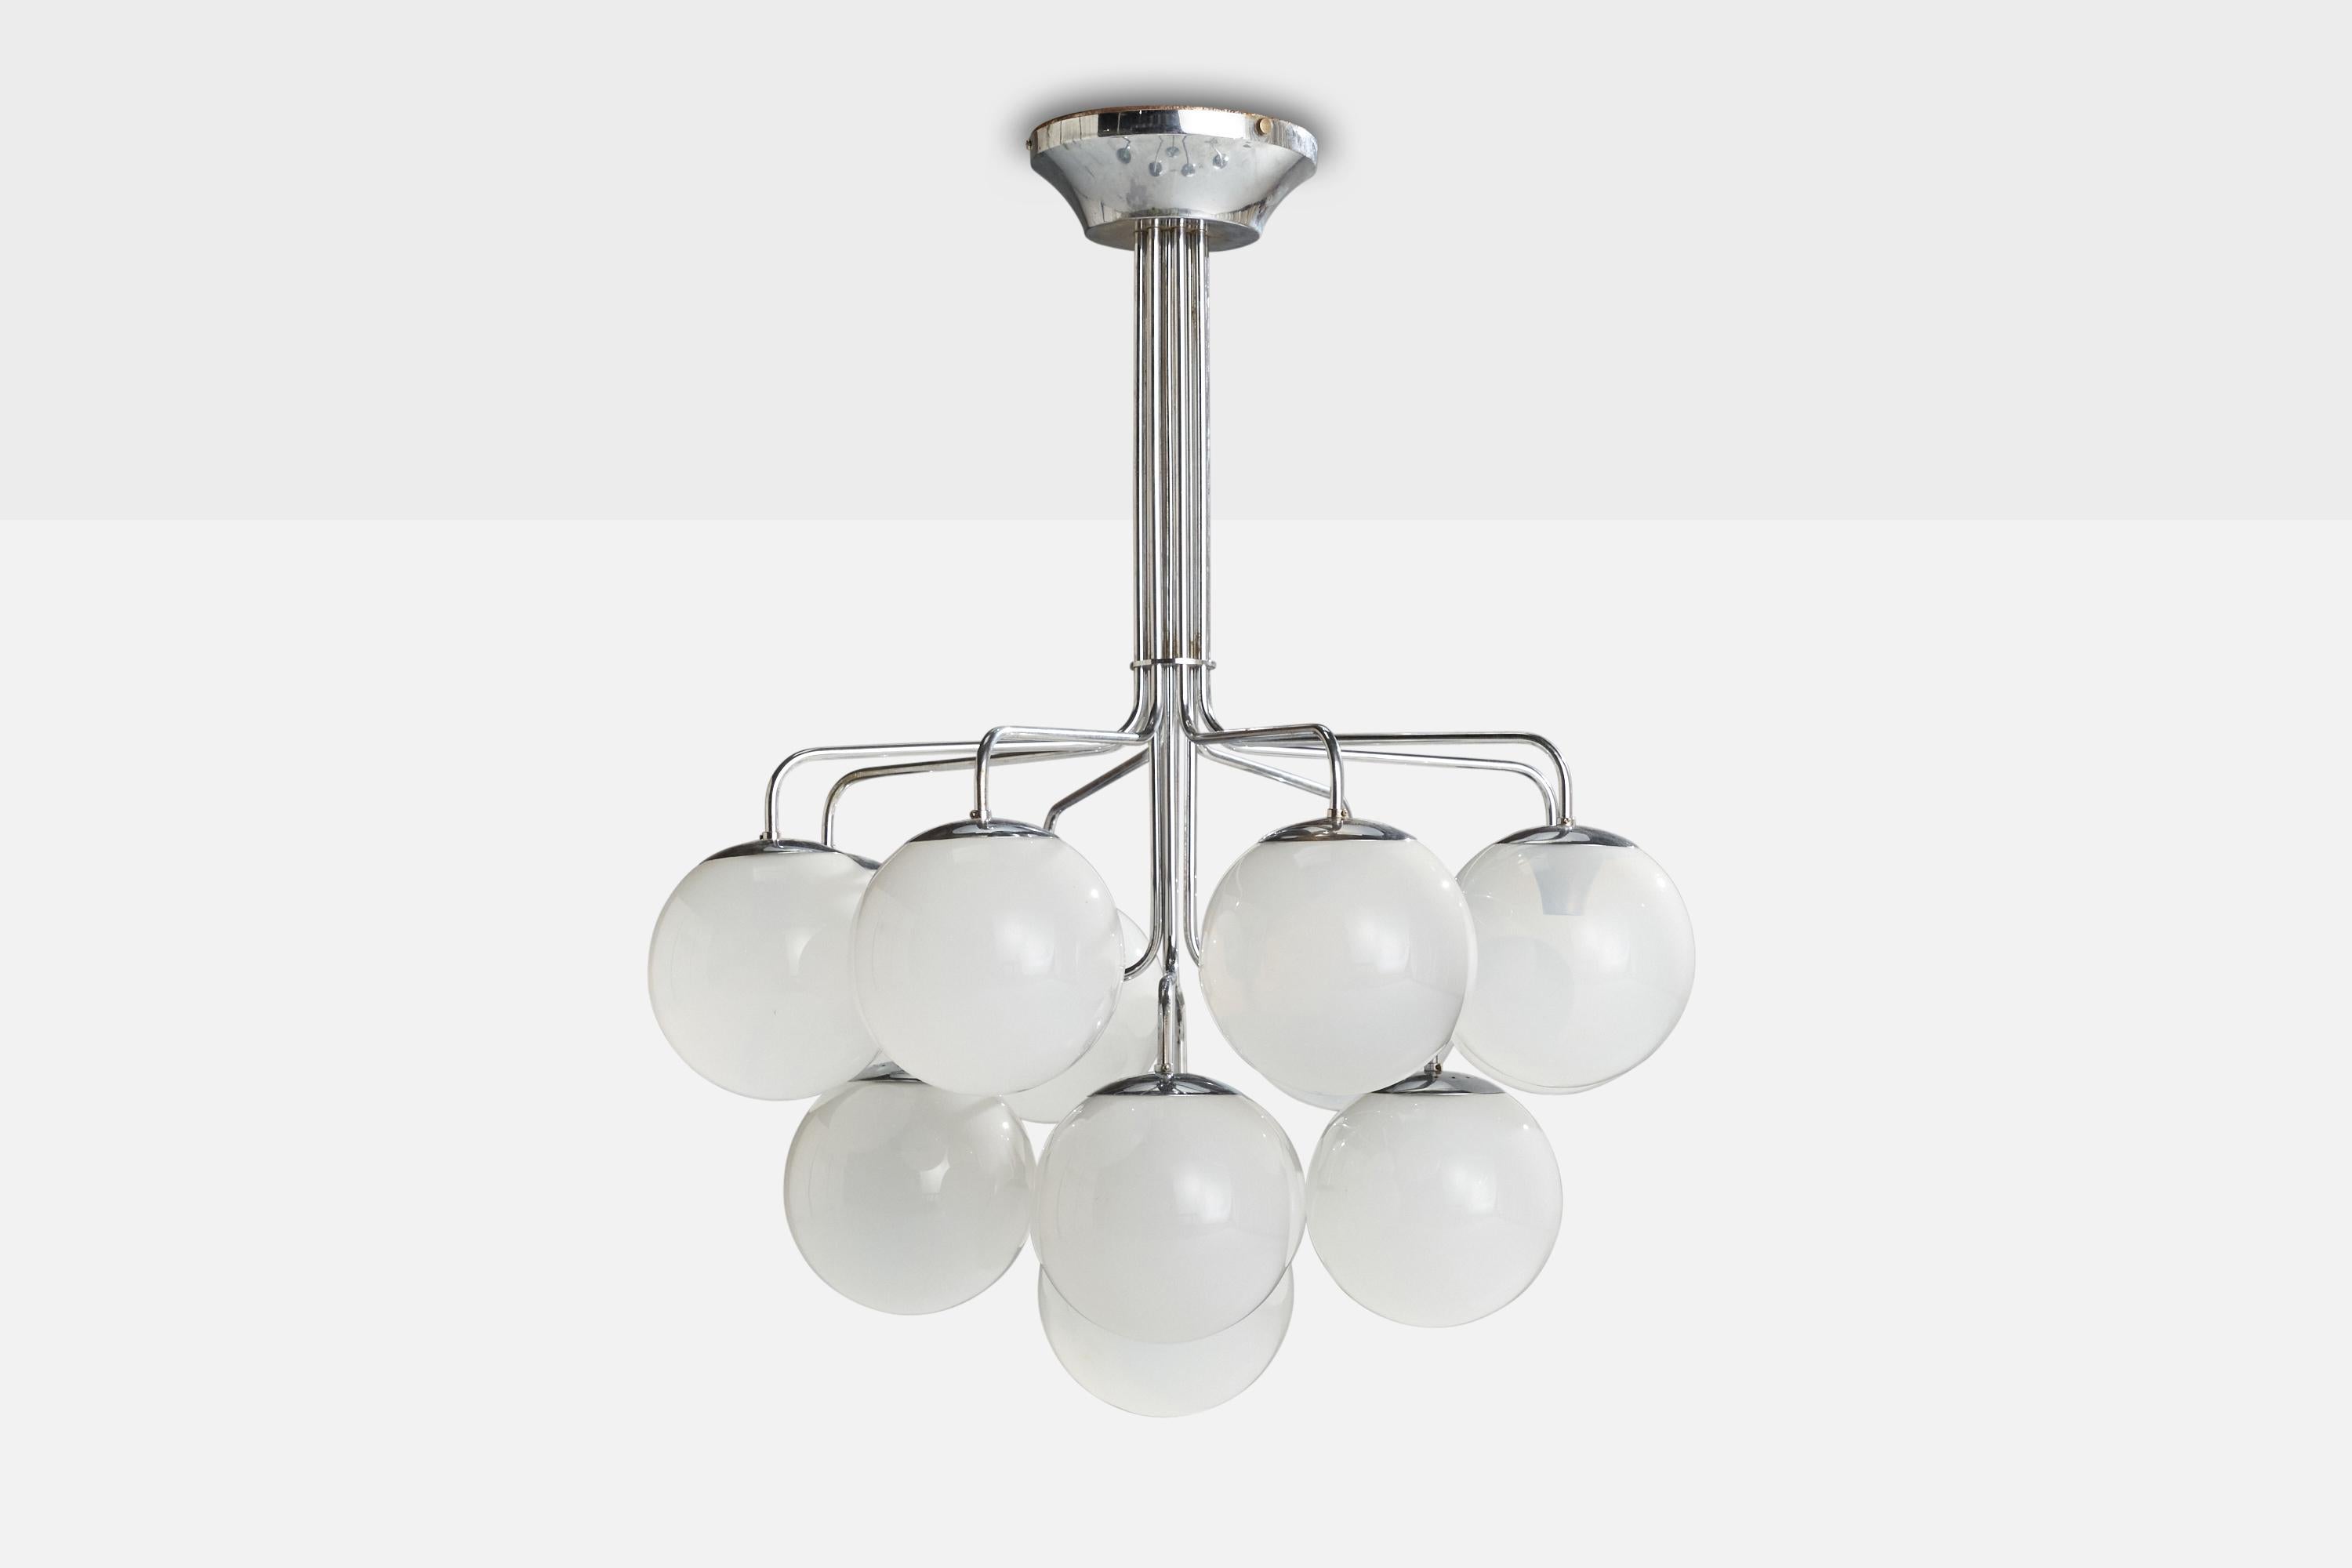 Italian Candle, Chandelier, Nickel, Glass, Italy, 1970 For Sale